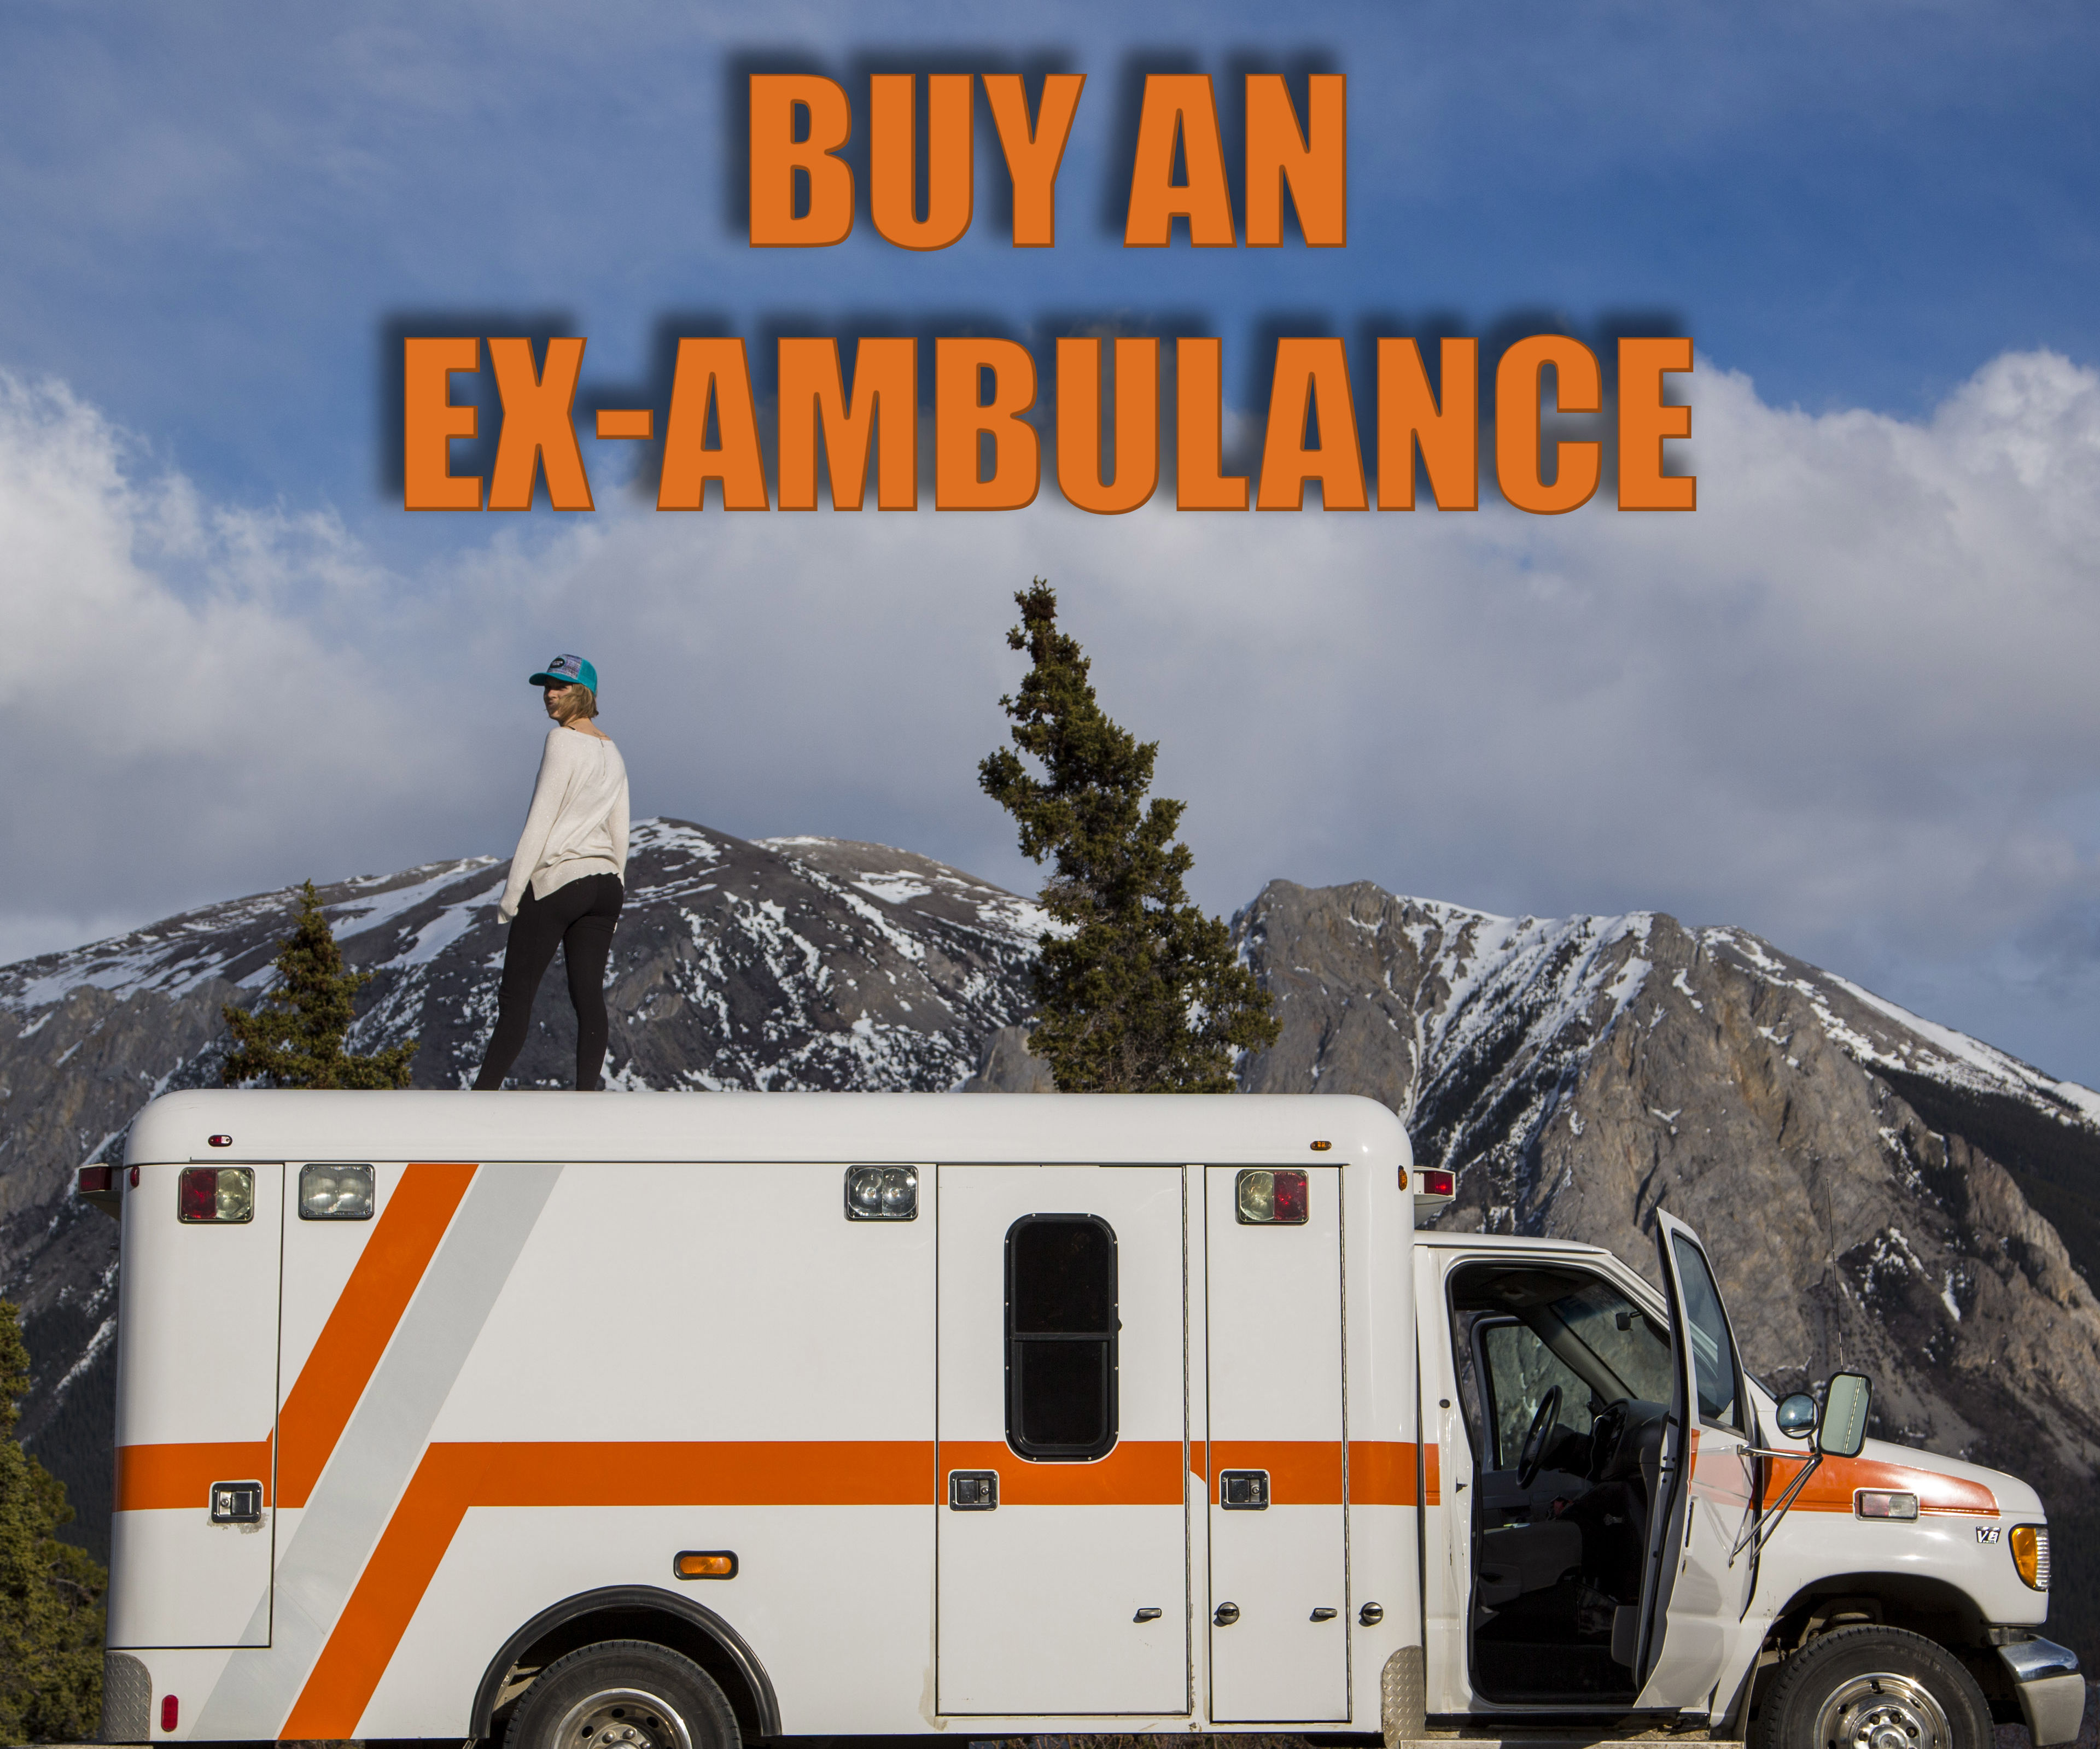 How to Buy an Ex-Ambulance